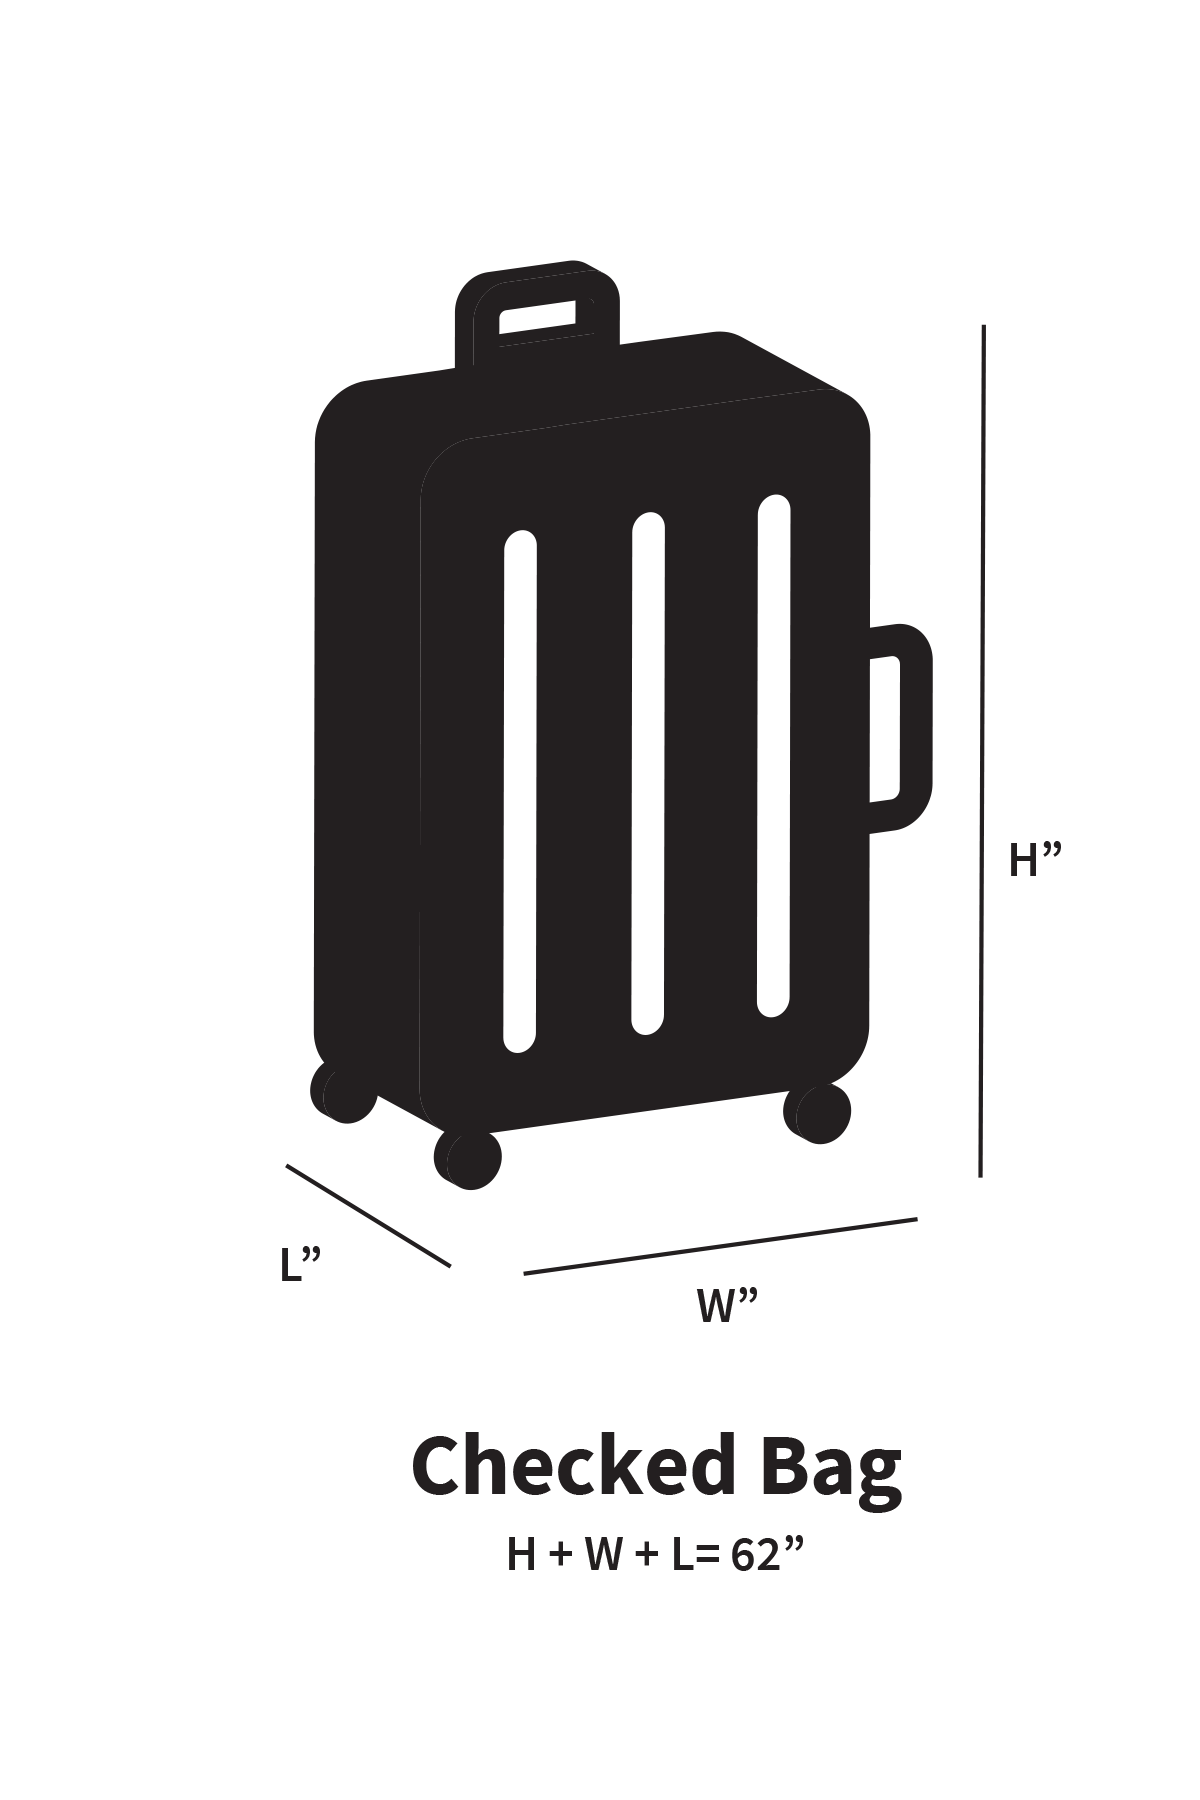 how much does it cost to check a bag